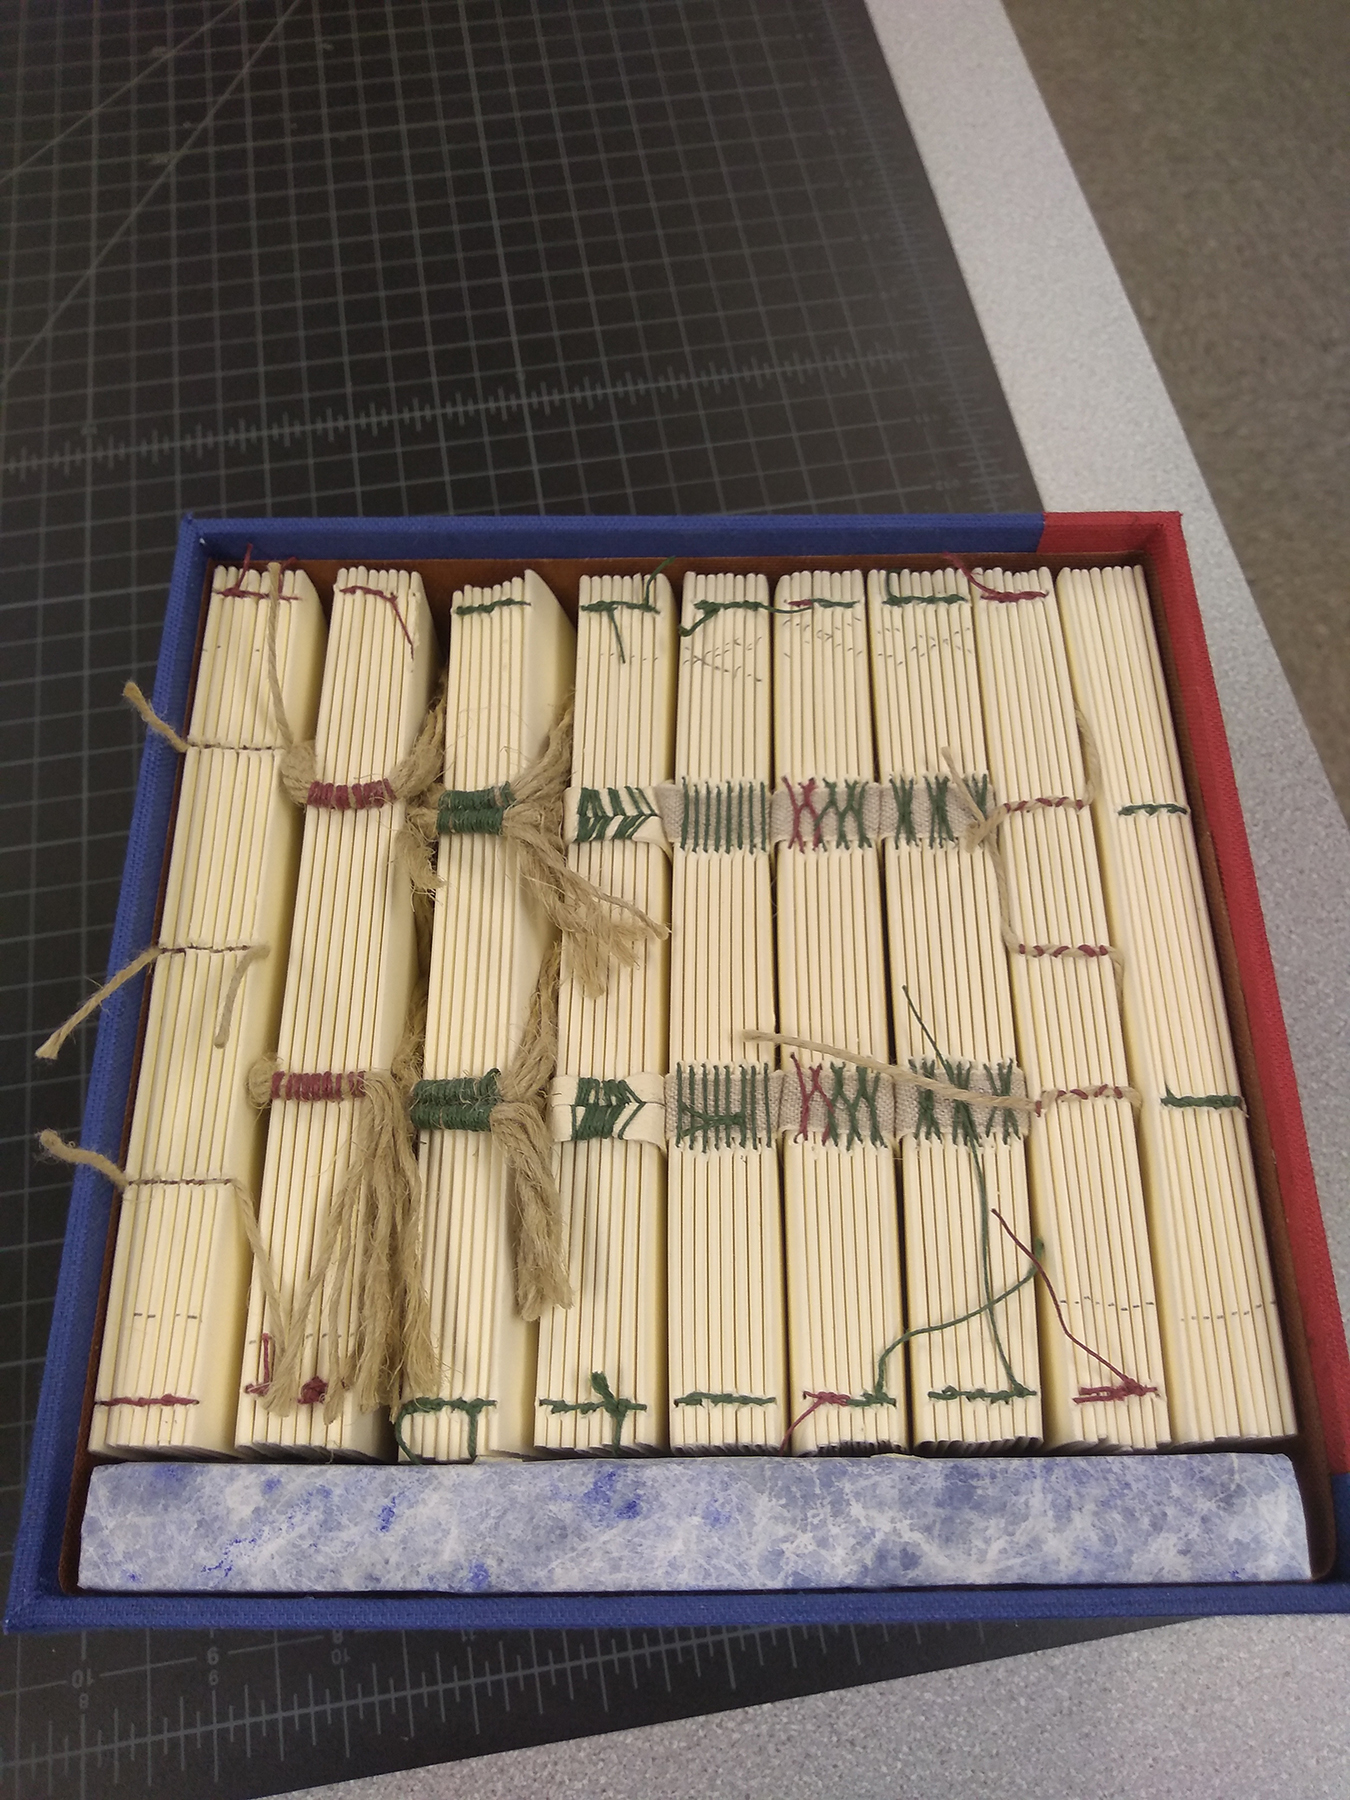 A book containing examples of binding types.